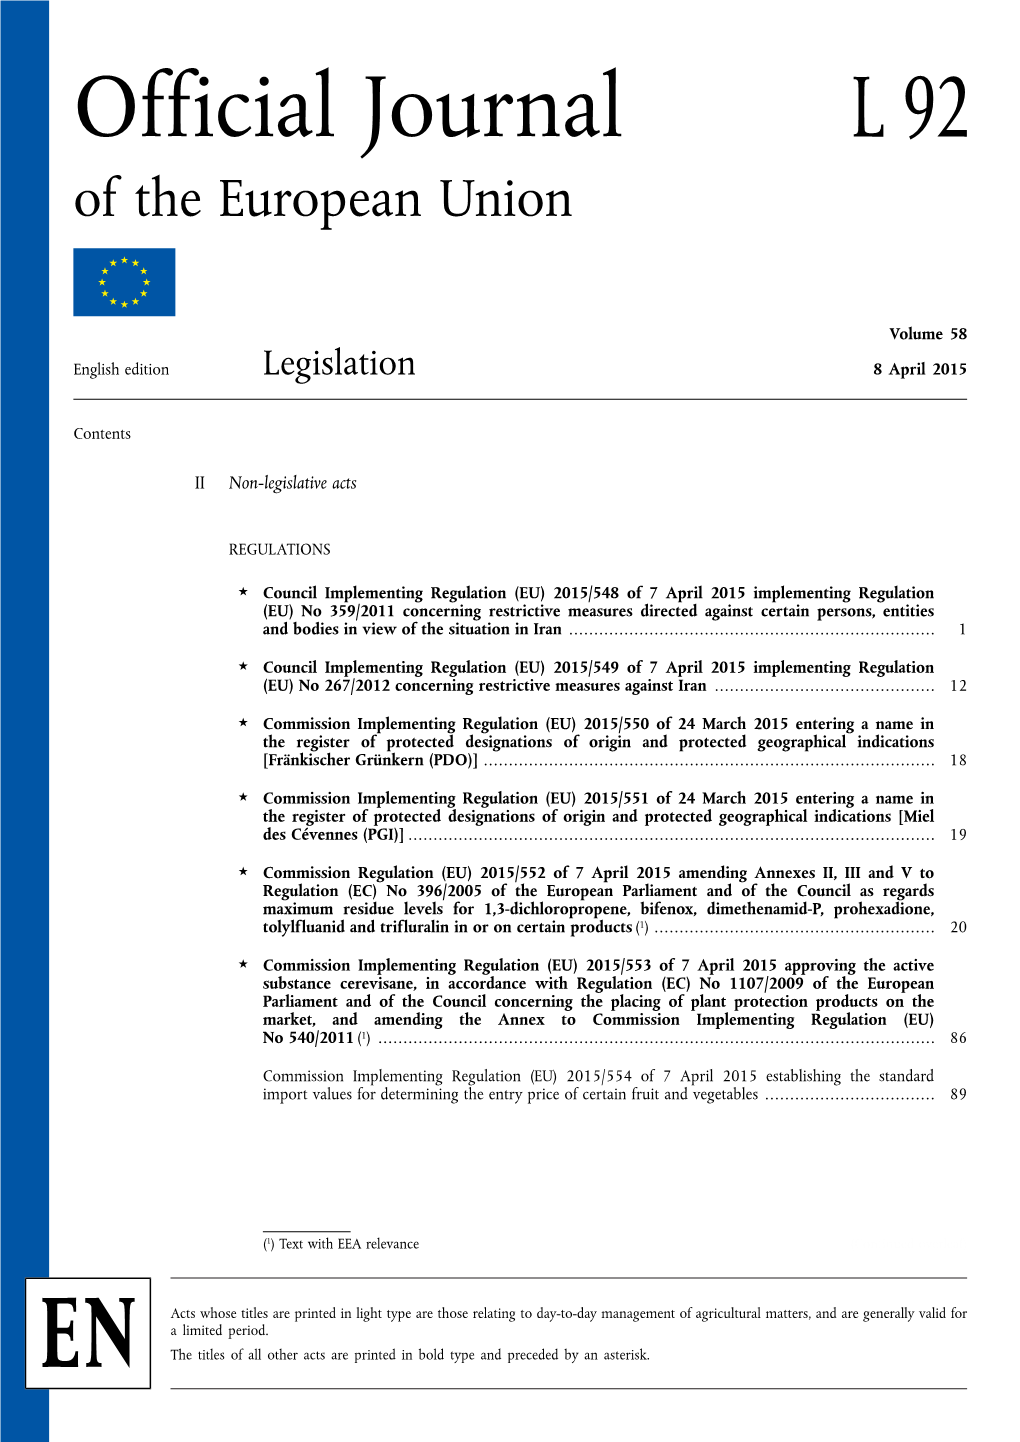 Official Journal L 92 of the European Union